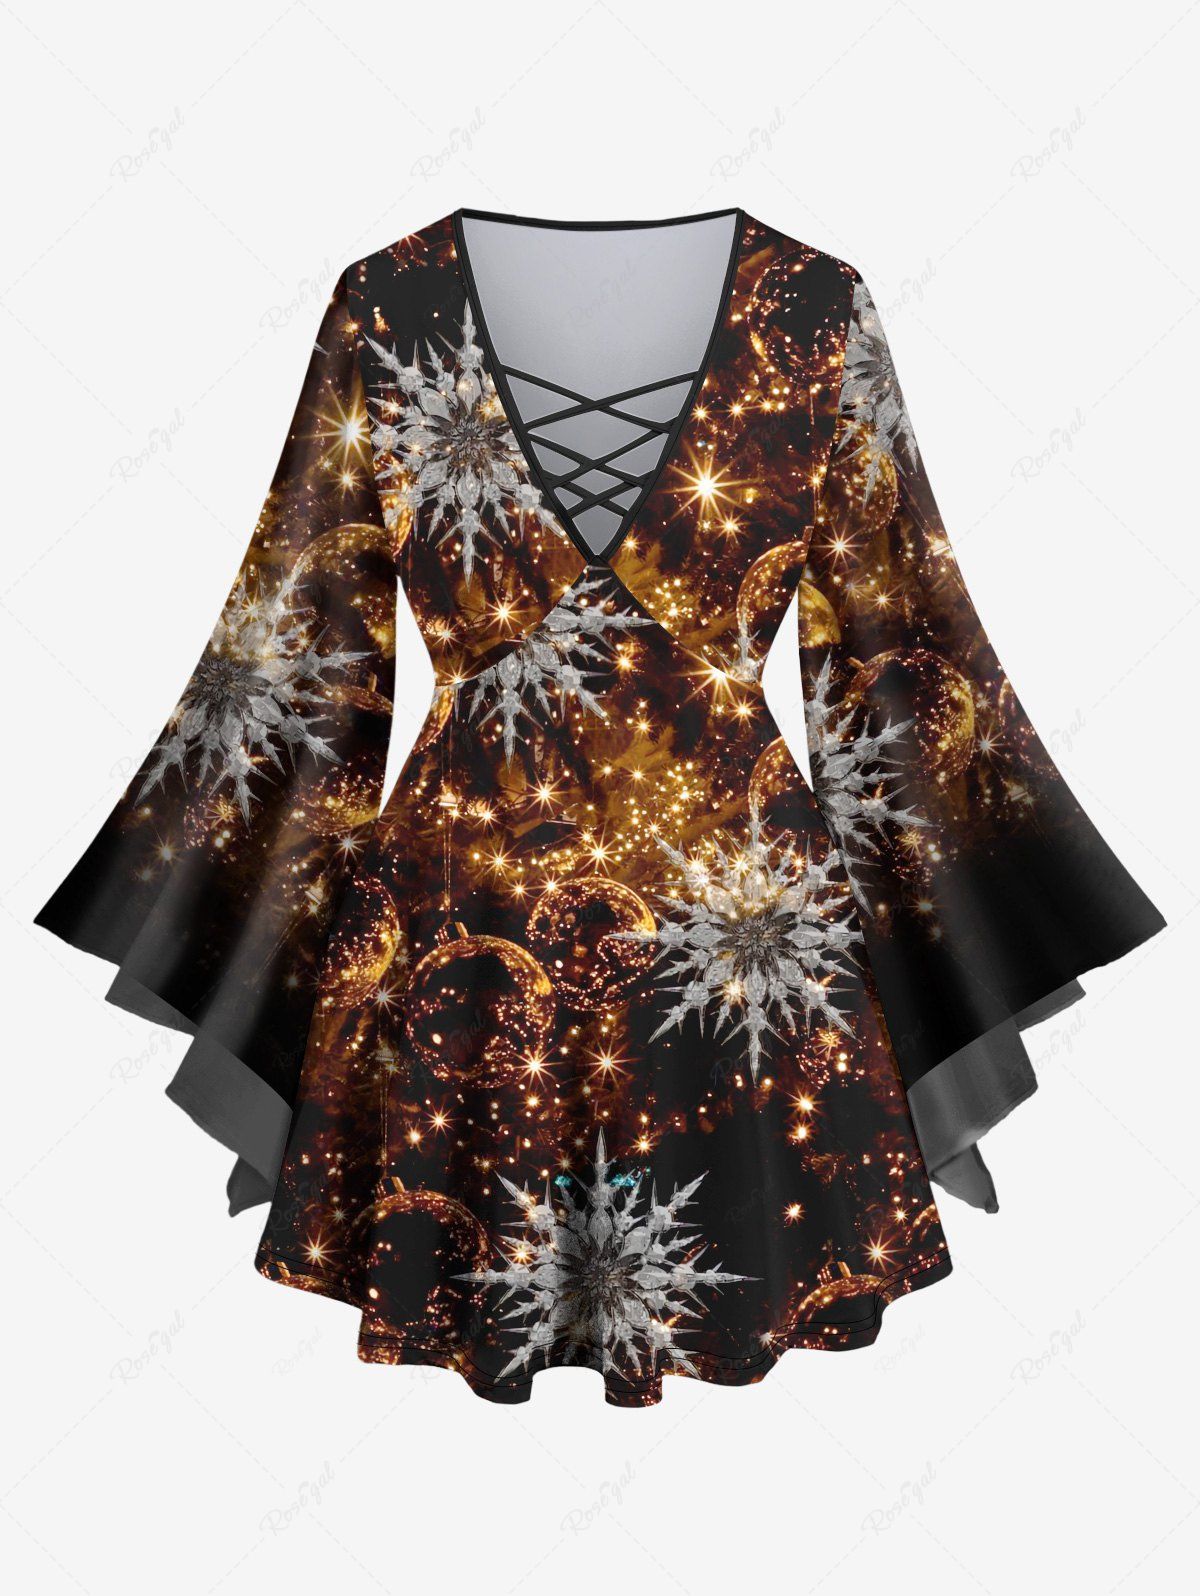 Chic Plus Size Flare Sleeves Glitter Sparkling Christmas Ball Light Snowflake Print Lattice Ombre Top  